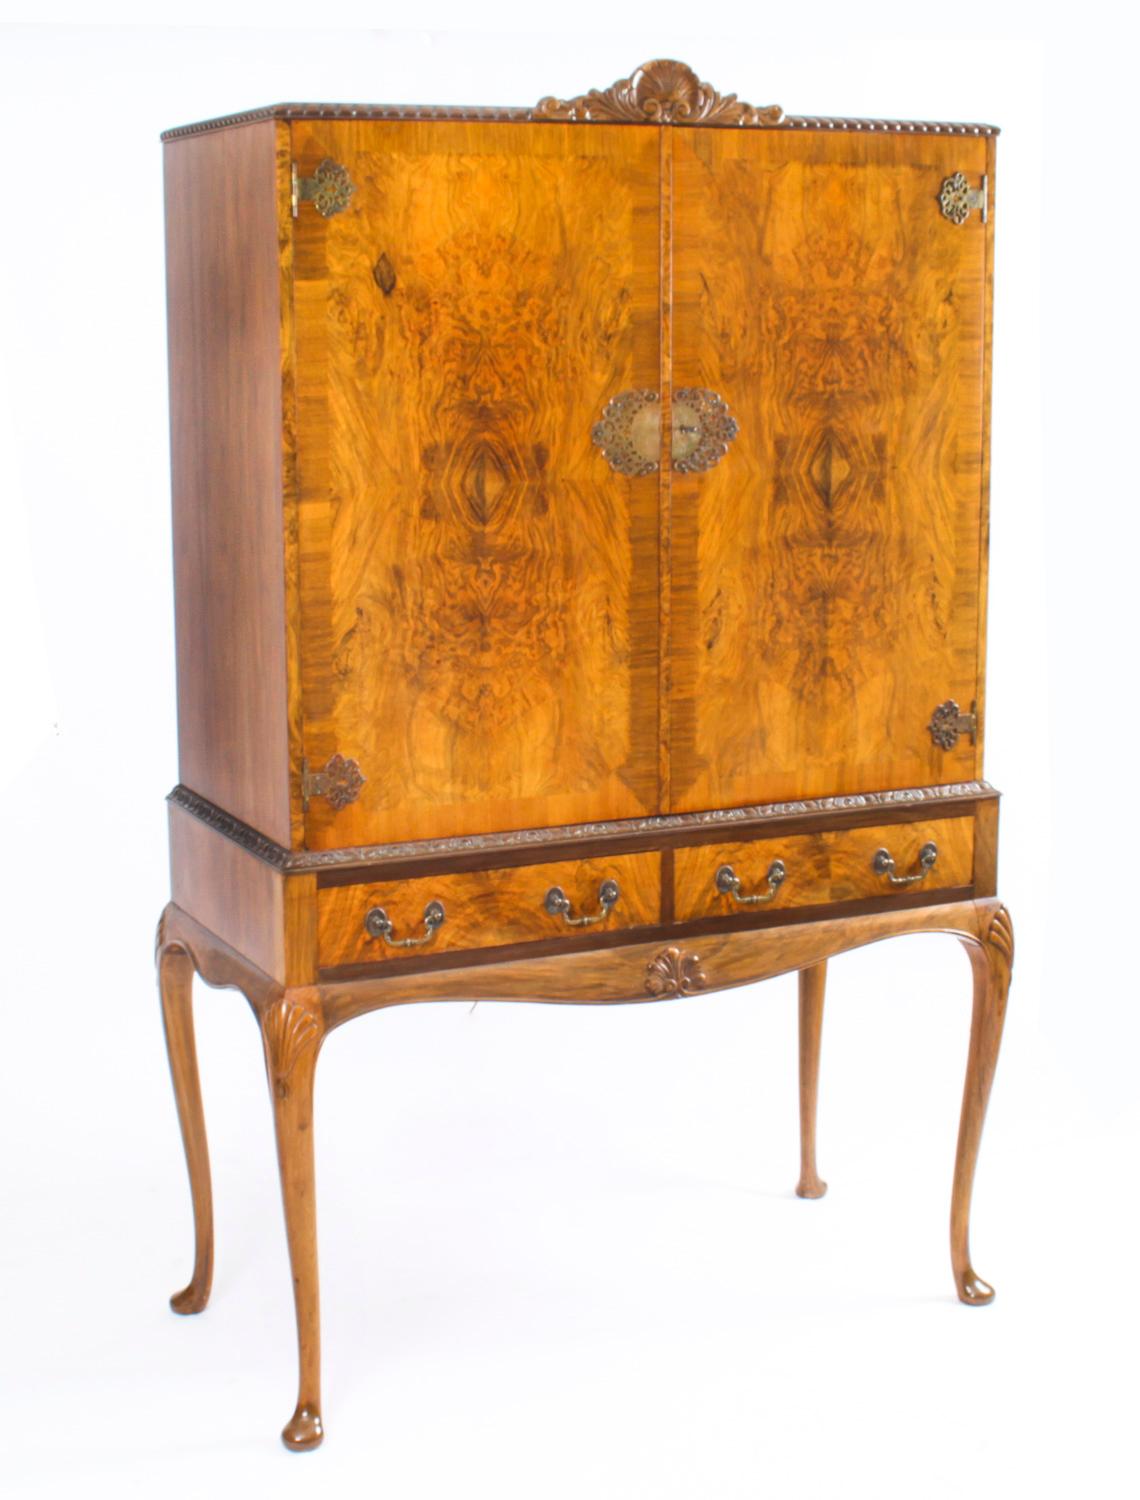 Vintage Burr Walnut Queen Anne Cocktail Cabinet Drinks Dry Bar Early 20th C For Sale 13